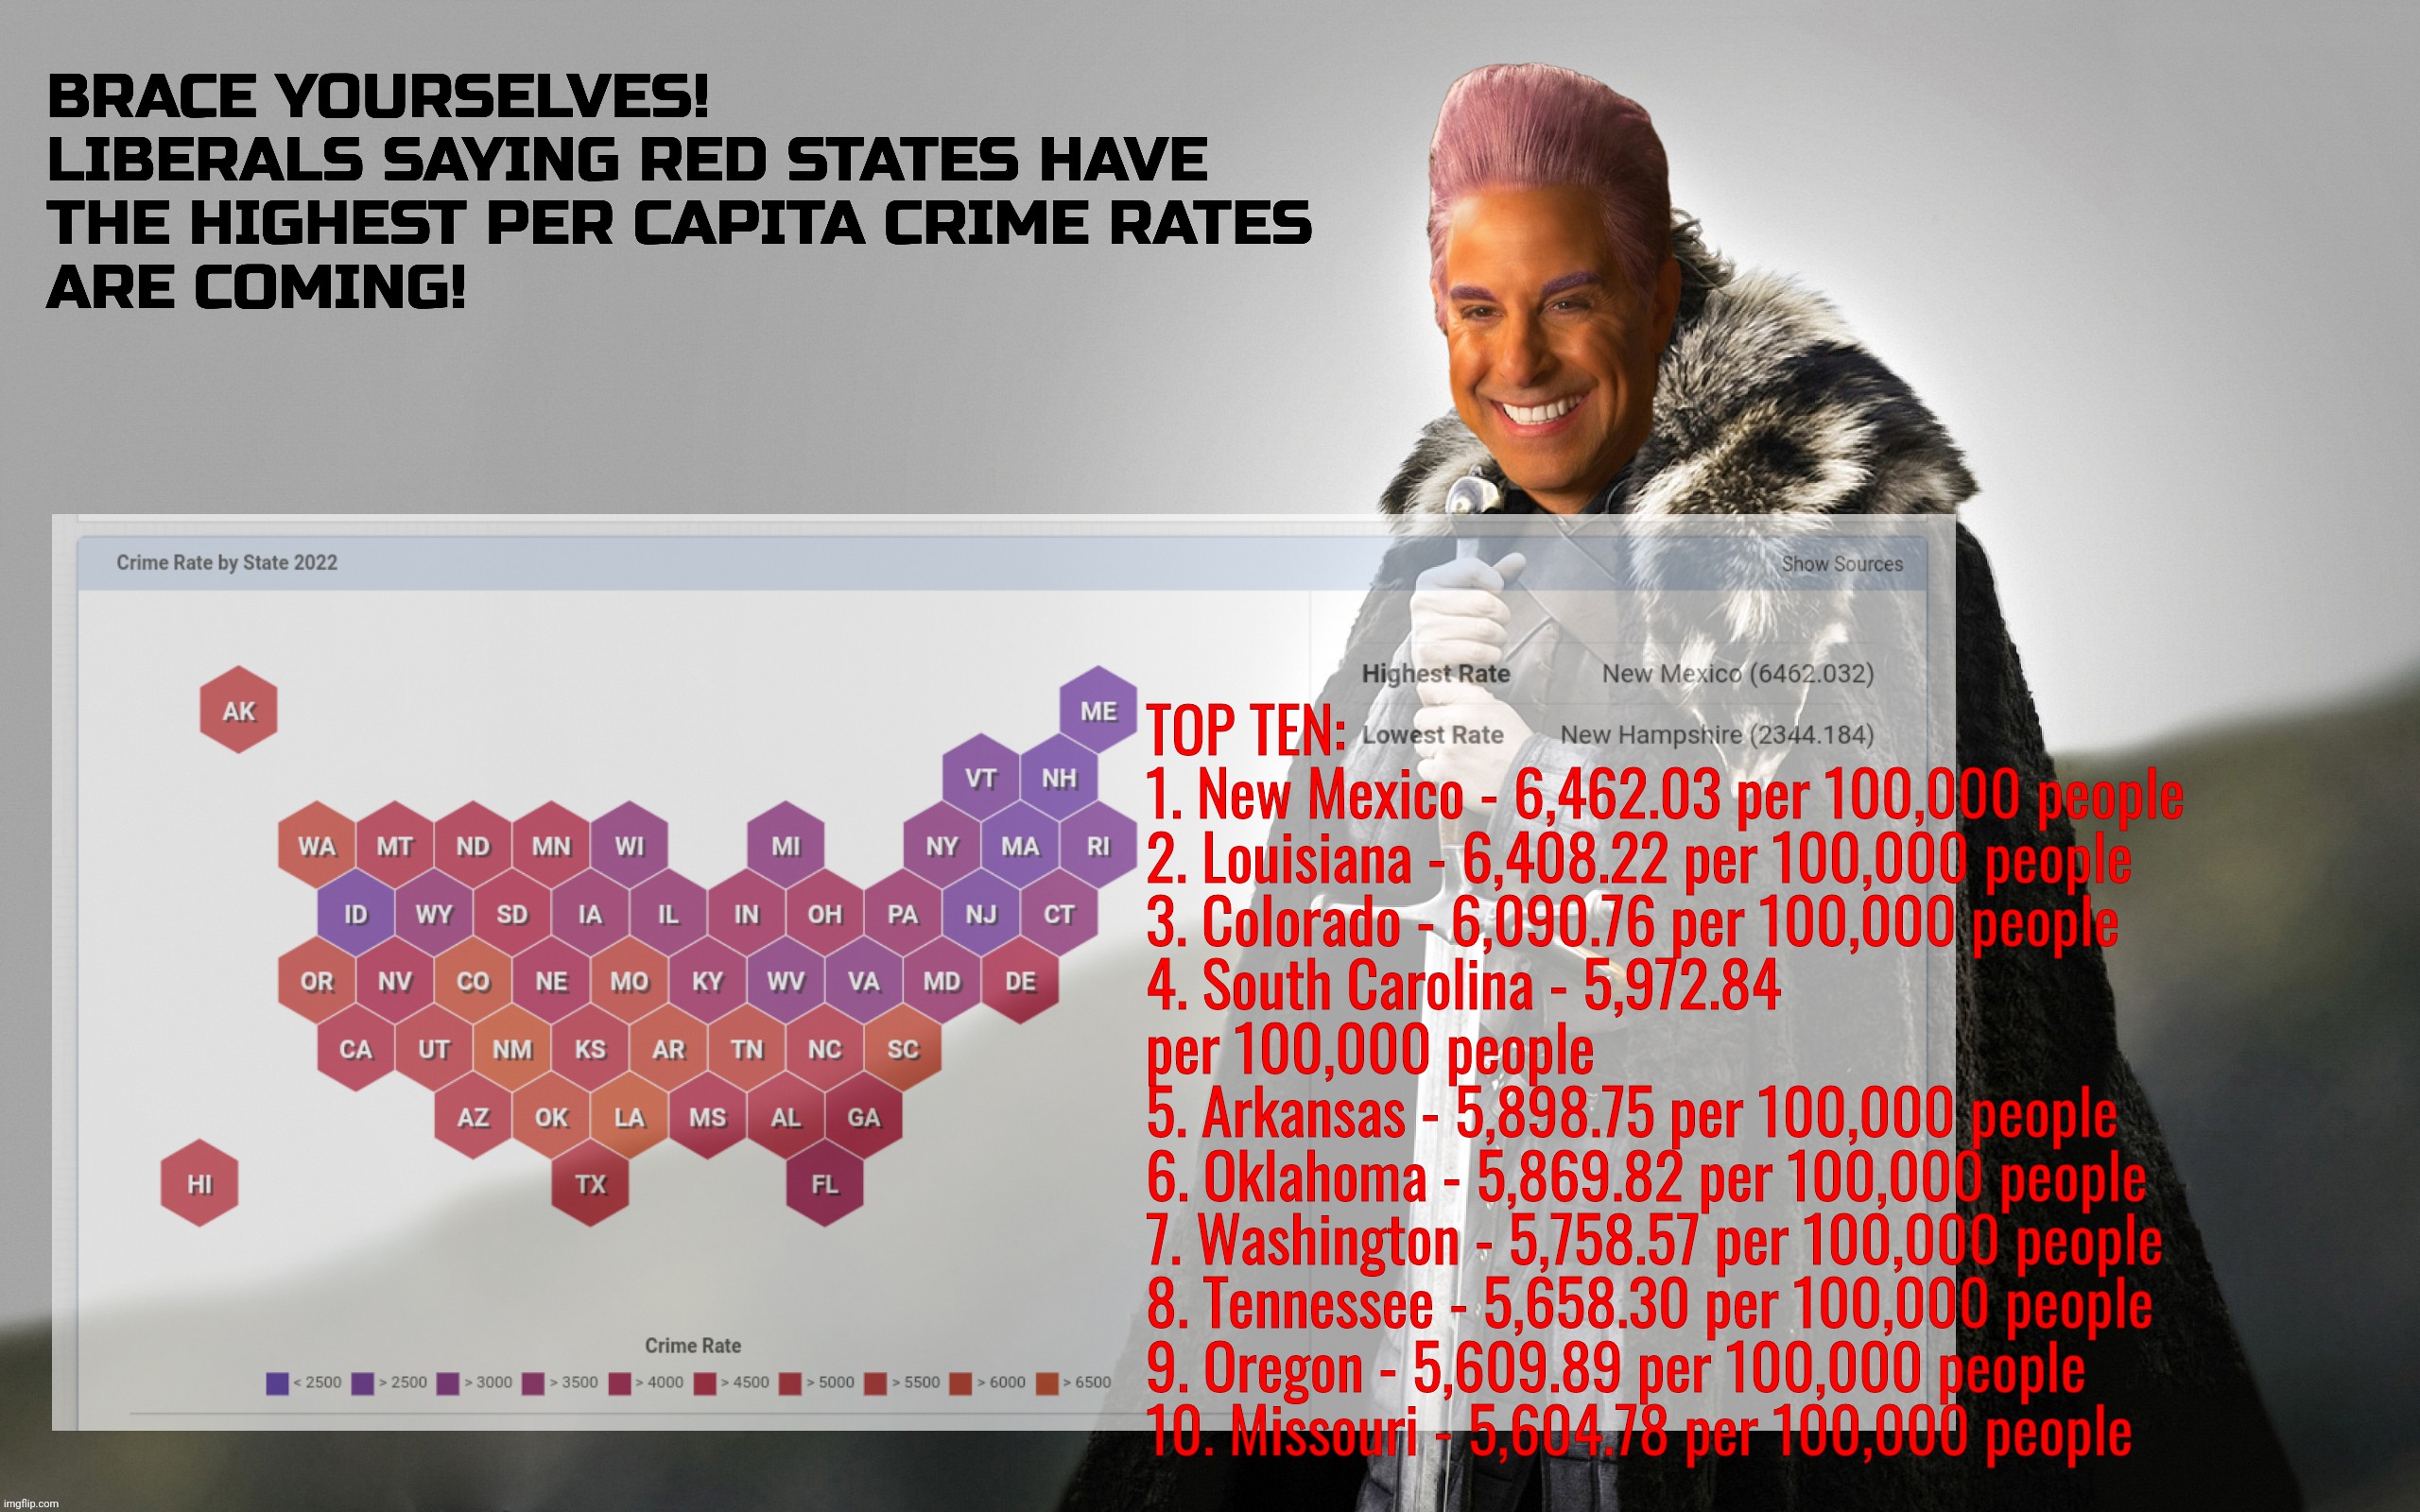 Simply saying Red States have the highest per capita crime rates doesn't make it true, even with the numbers to back it up! | BRACE YOURSELVES!
LIBERALS SAYING RED STATES HAVE
THE HIGHEST PER CAPITA CRIME RATES
ARE COMING! TOP TEN:
1. New Mexico - 6,462.03 per 100,000 people
2. Louisiana - 6,408.22 per 100,000 people
3. Colorado - 6,090.76 per 100,000 people
4. South Carolina - 5,972.84 per 100,000 people
5. Arkansas - 5,898.75 per 100,000 people
6. Oklahoma - 5,869.82 per 100,000 people
7. Washington - 5,758.57 per 100,000 people
8. Tennessee - 5,658.30 per 100,000 people
9. Oregon - 5,609.89 per 100,000 people
10. Missouri - 5,604.78 per 100,000 people | image tagged in brace yourselves,brace yourselves x is coming,caesar flickerman,red states have the highest per capita crime rates,memes | made w/ Imgflip meme maker